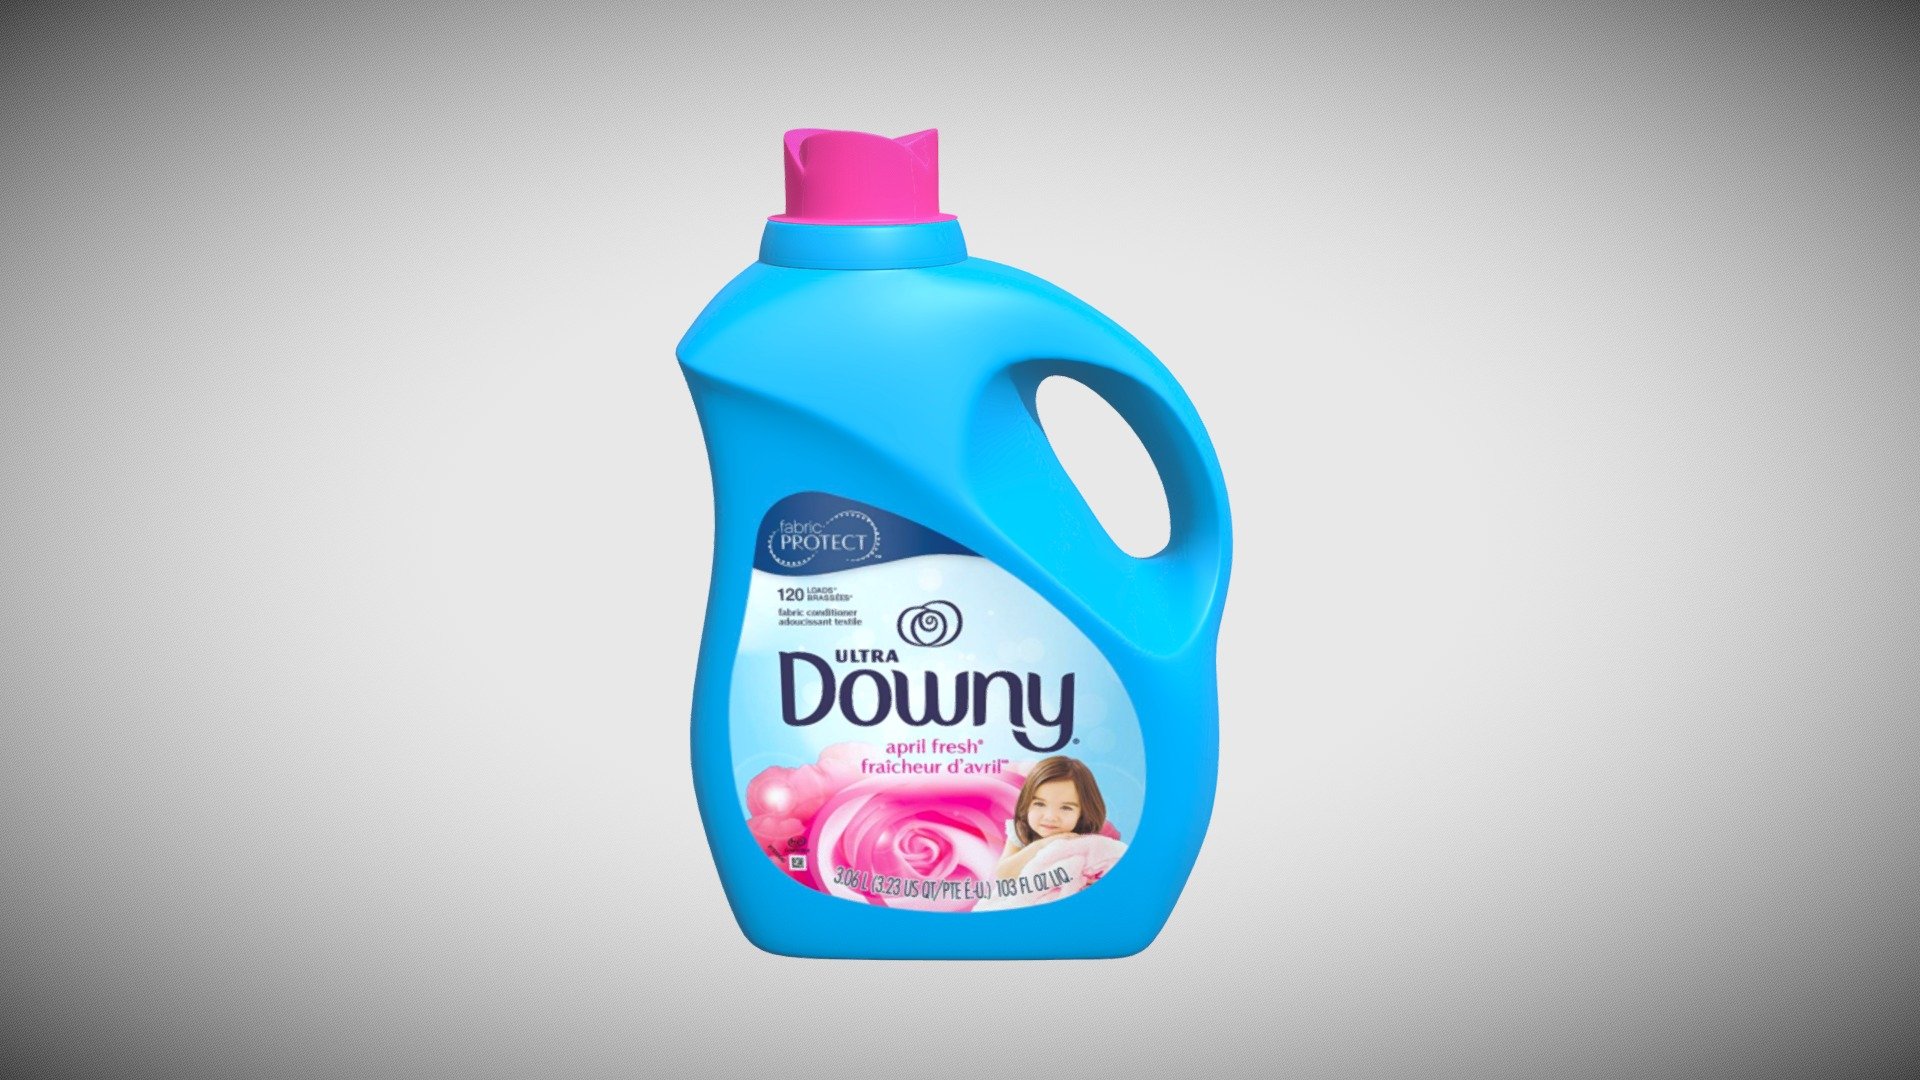 Detailed model of ultra downy april fresh detergent bottle modeled in Cinema 4D.The model was created using approximate real world dimensions.

The model has 21,140 polys and 21,192 vertices.

An additional file has been provided containing the original Cinema 4D project file, textures and other 3d export files such as 3ds, fbx, obj and stl 3d model